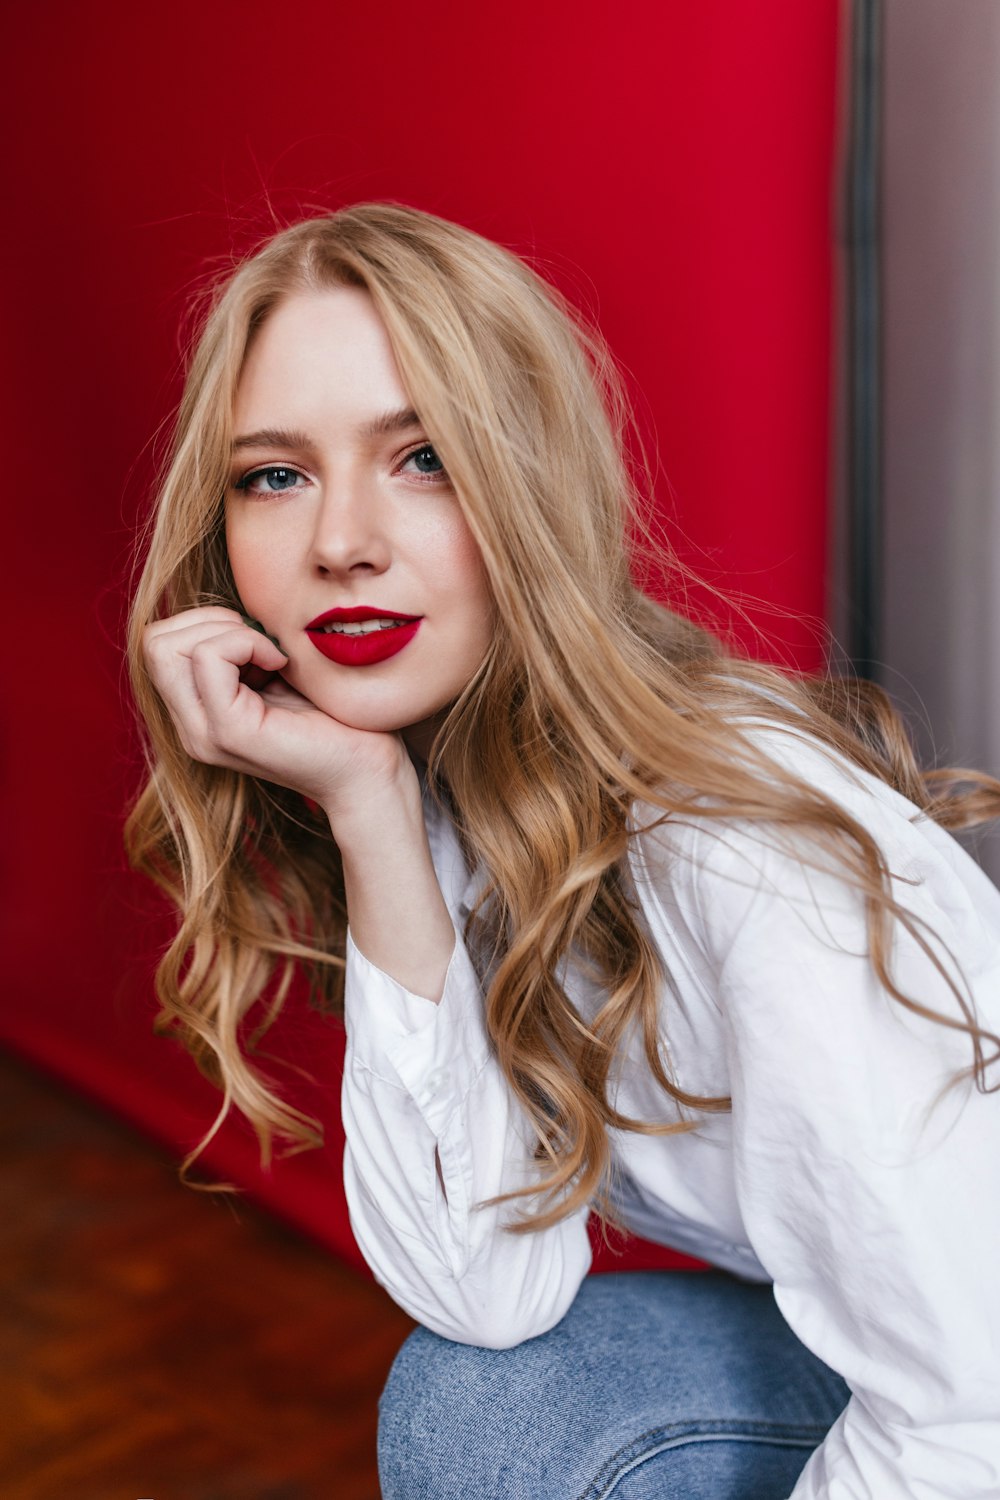 a woman with long blonde hair and red lipstick